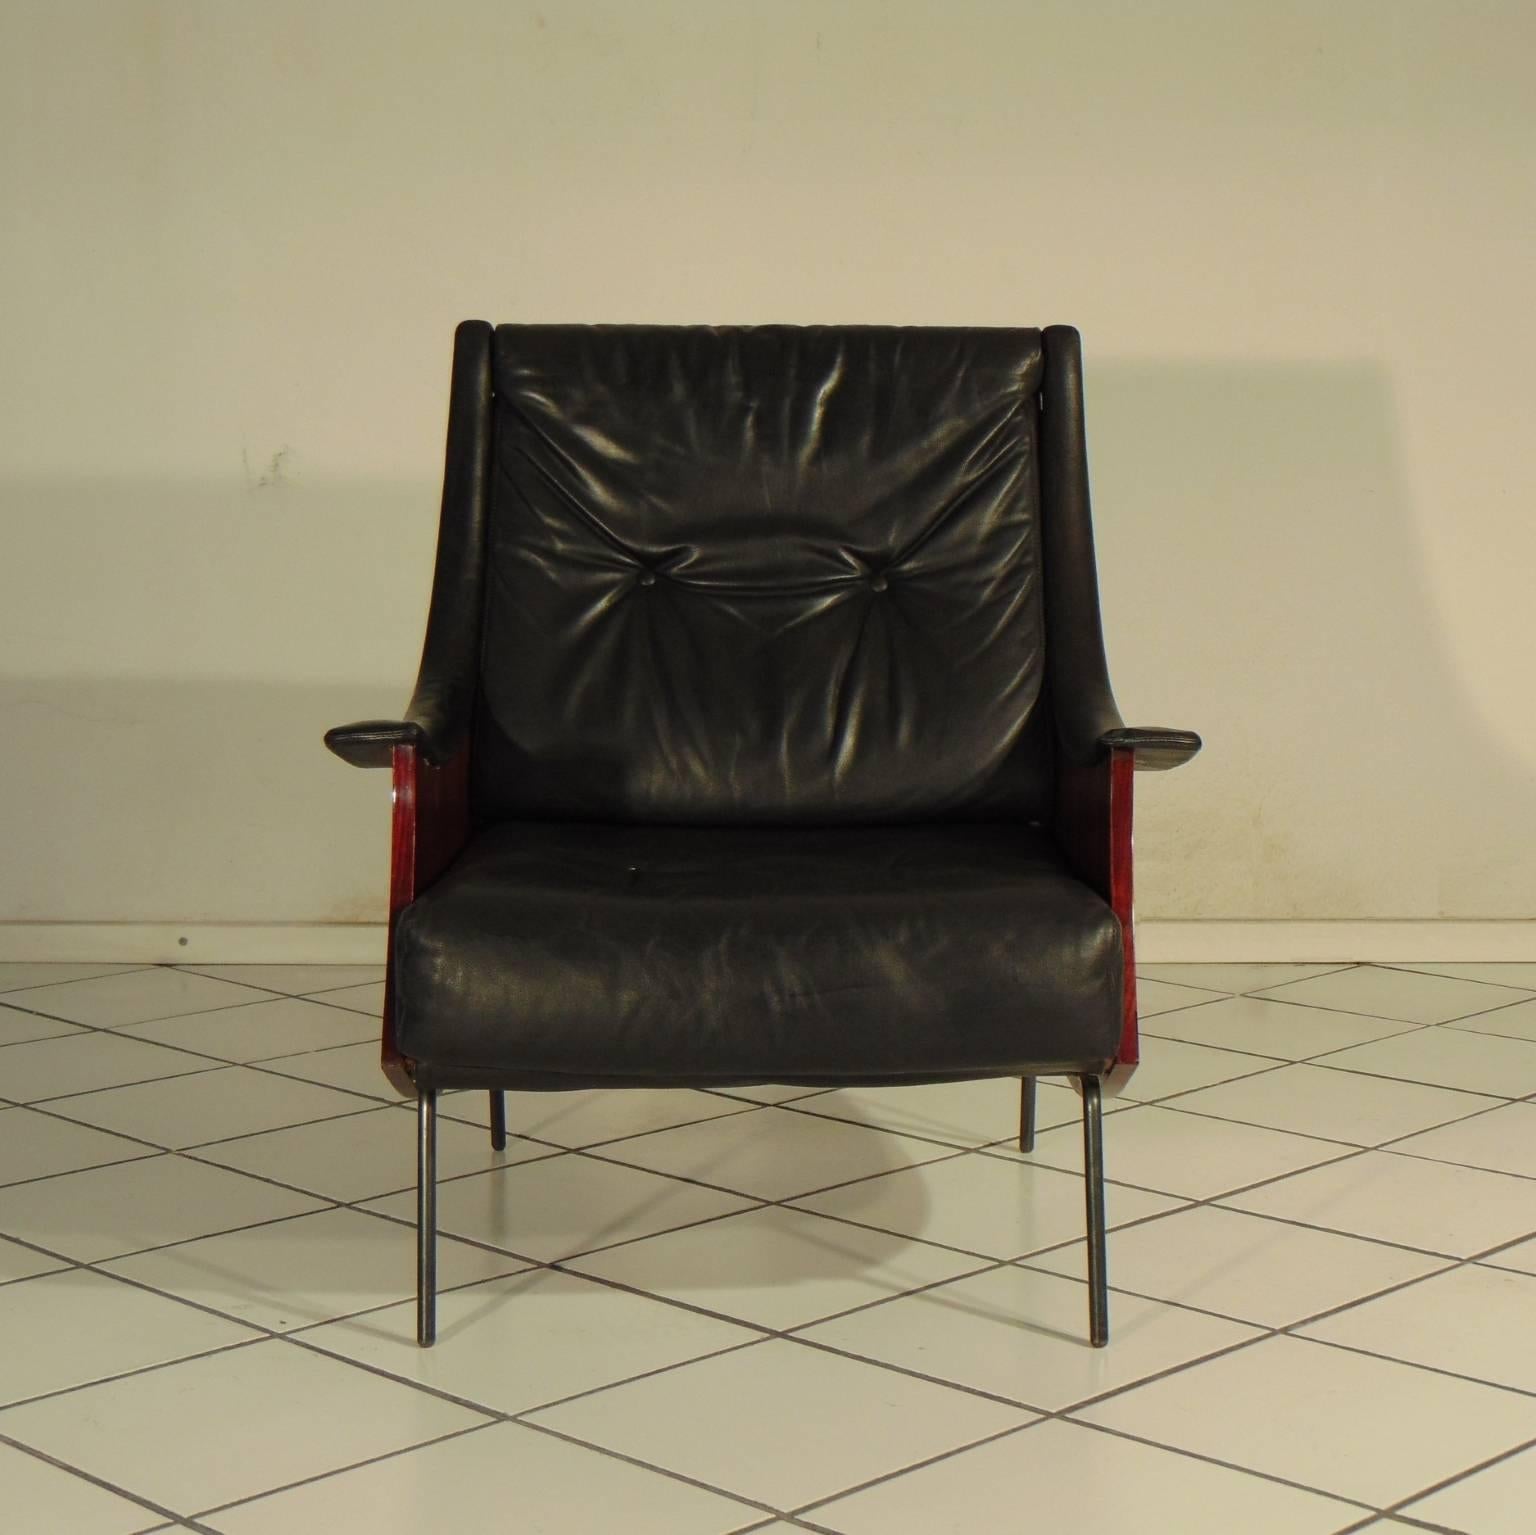 Very first piece of the armchair Pipa in rosewood and black leather with gunmetal color feet, designed by Carlo De Carli and manufactured by Sormani of Arosio, Italy in 1965.
Seat height cm 39 (1.28 ft).
De Carli designed this chair as a hommage to